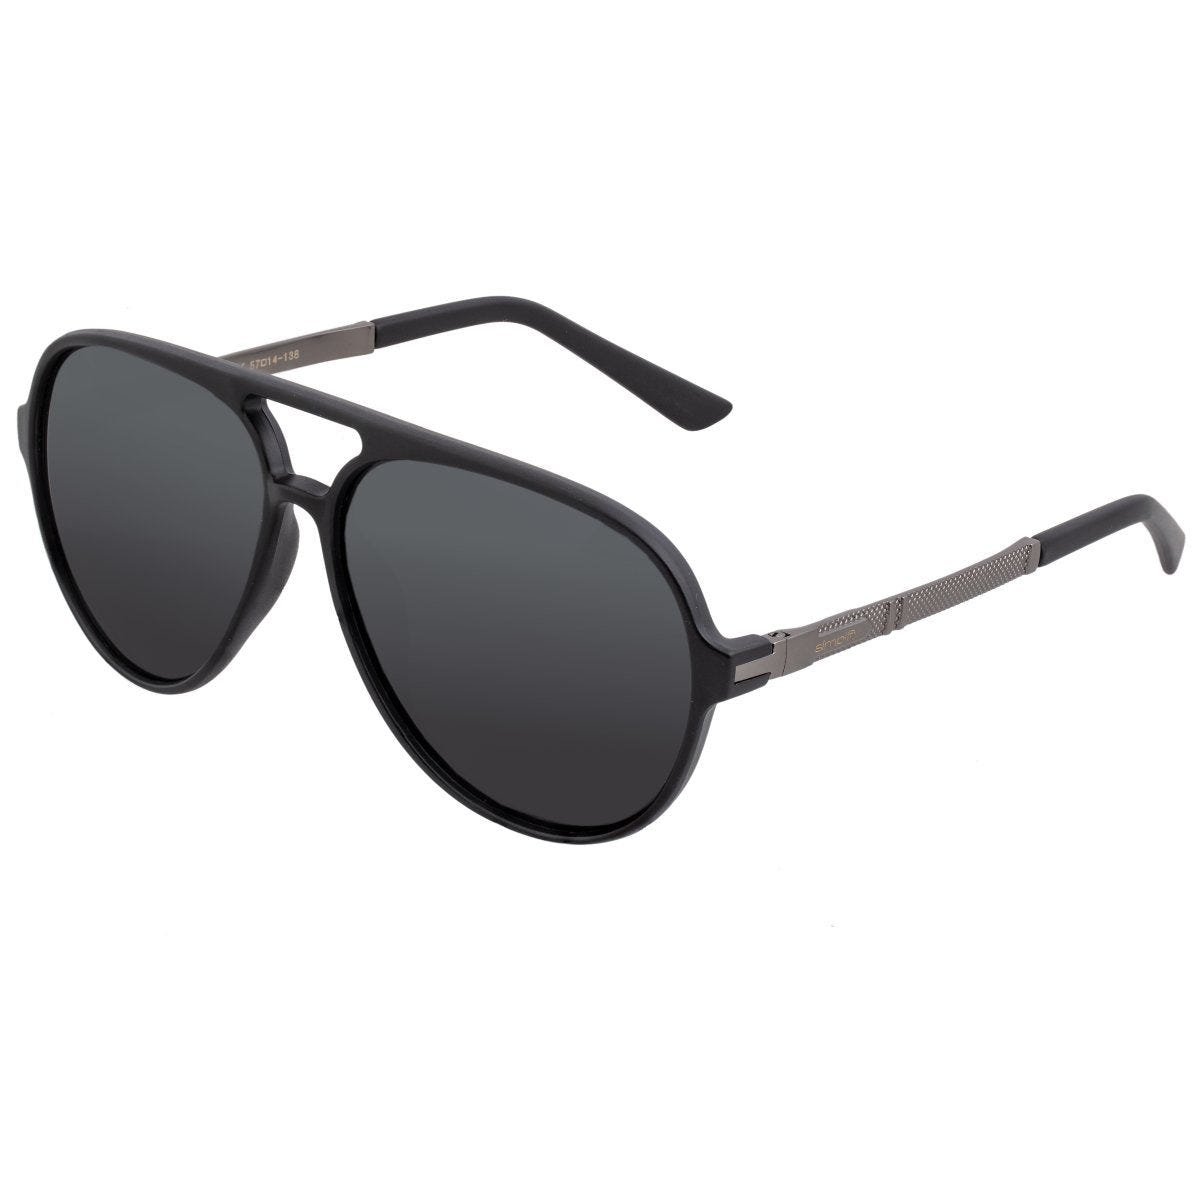 Black polarized sunglasses with a round frame design and detail on the sleek metal arms.